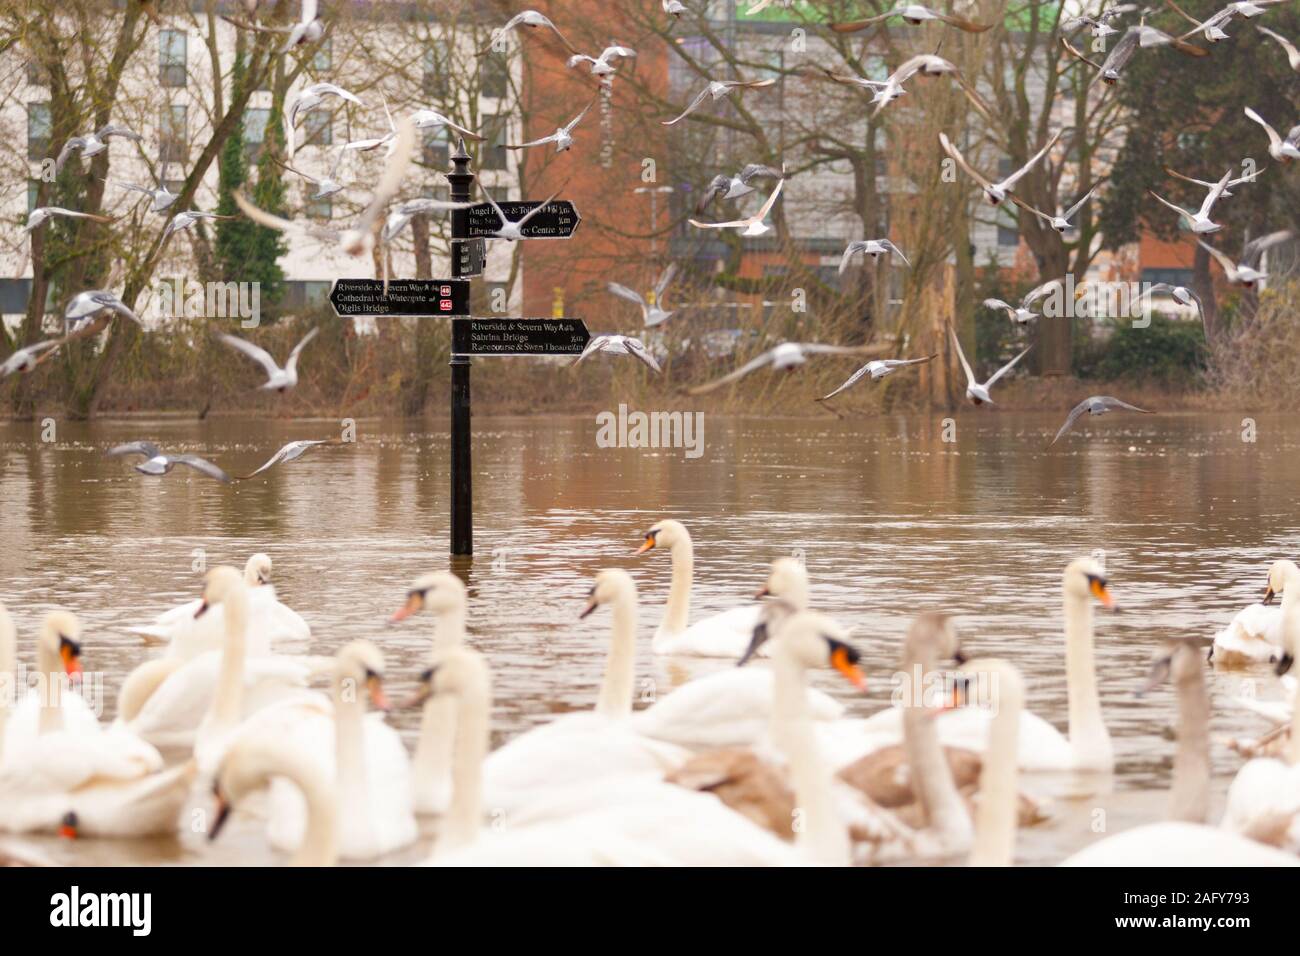 Worcester, Worcestershire, UK. 17th Dec, 2019. Swans take the latest flood to hit Worcester city in their stride as the River Severn breaks its banks putting parts of the riverside under several feet of water. Credit: Peter Lopeman/Alamy Live News Stock Photo